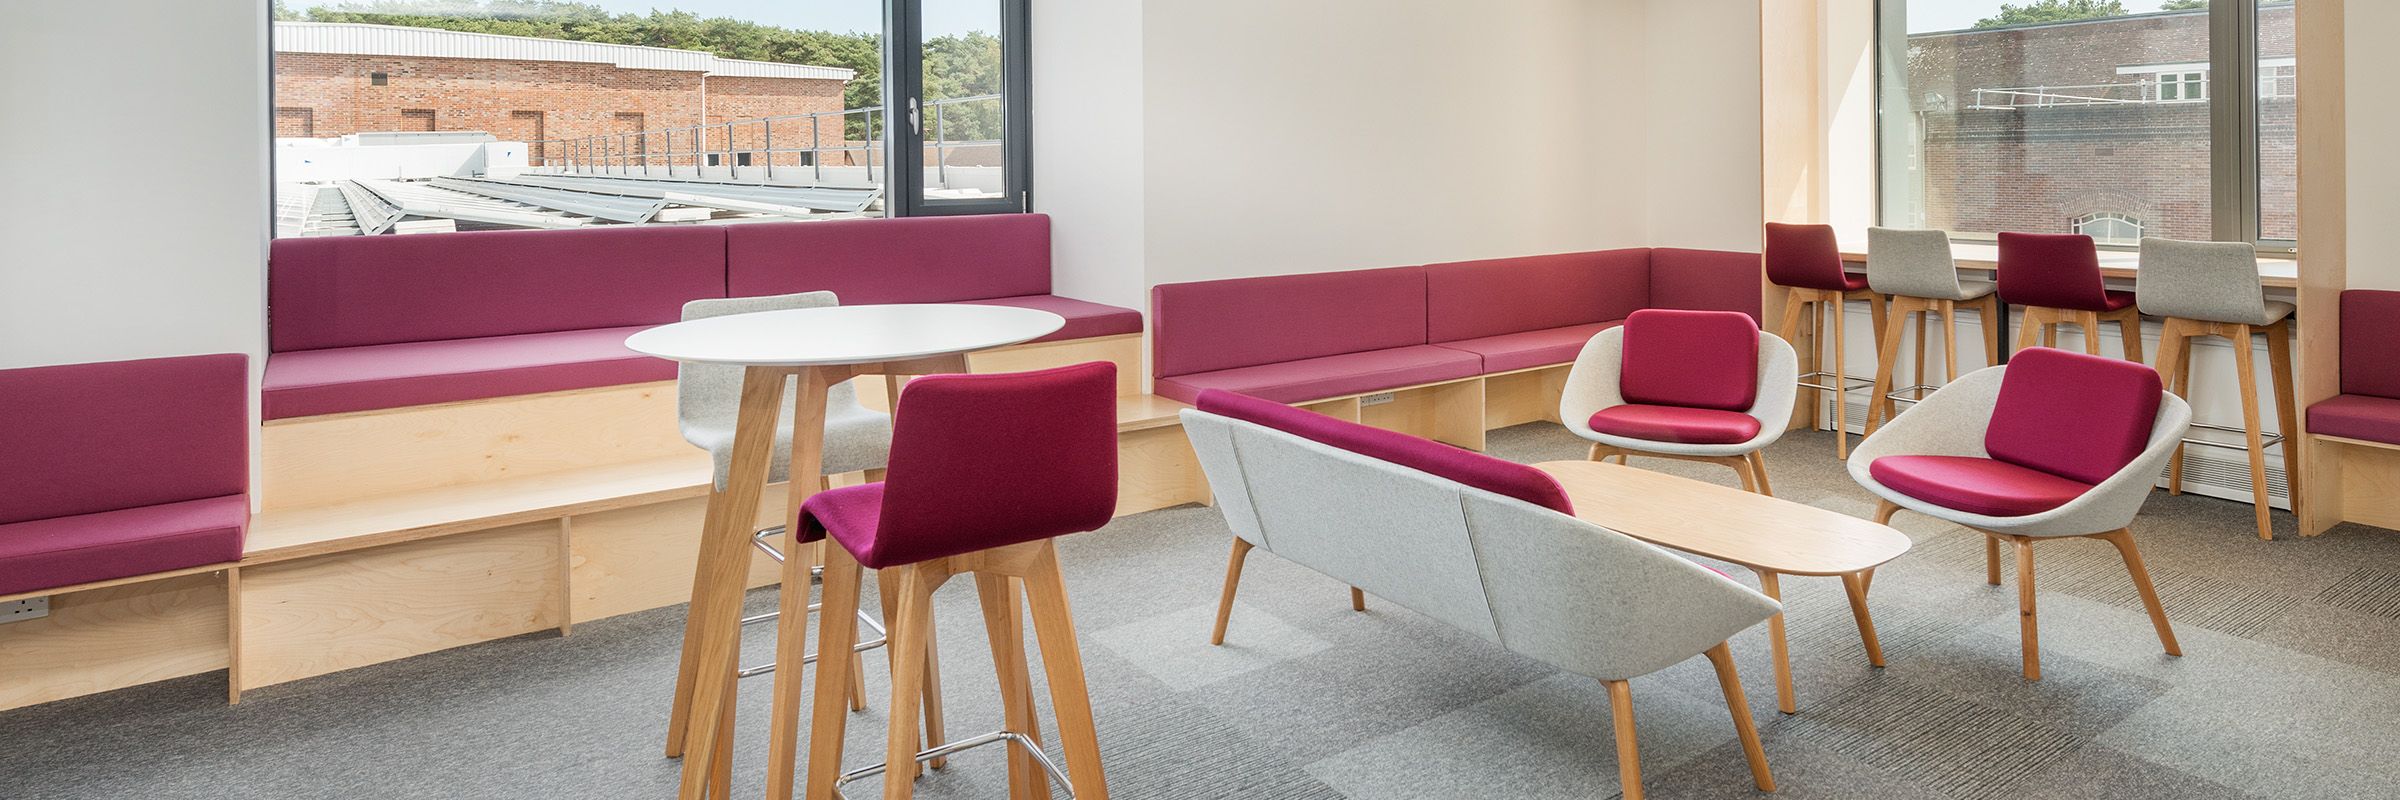 Talbot Heath School | School Fit-Out by Westcountry Group